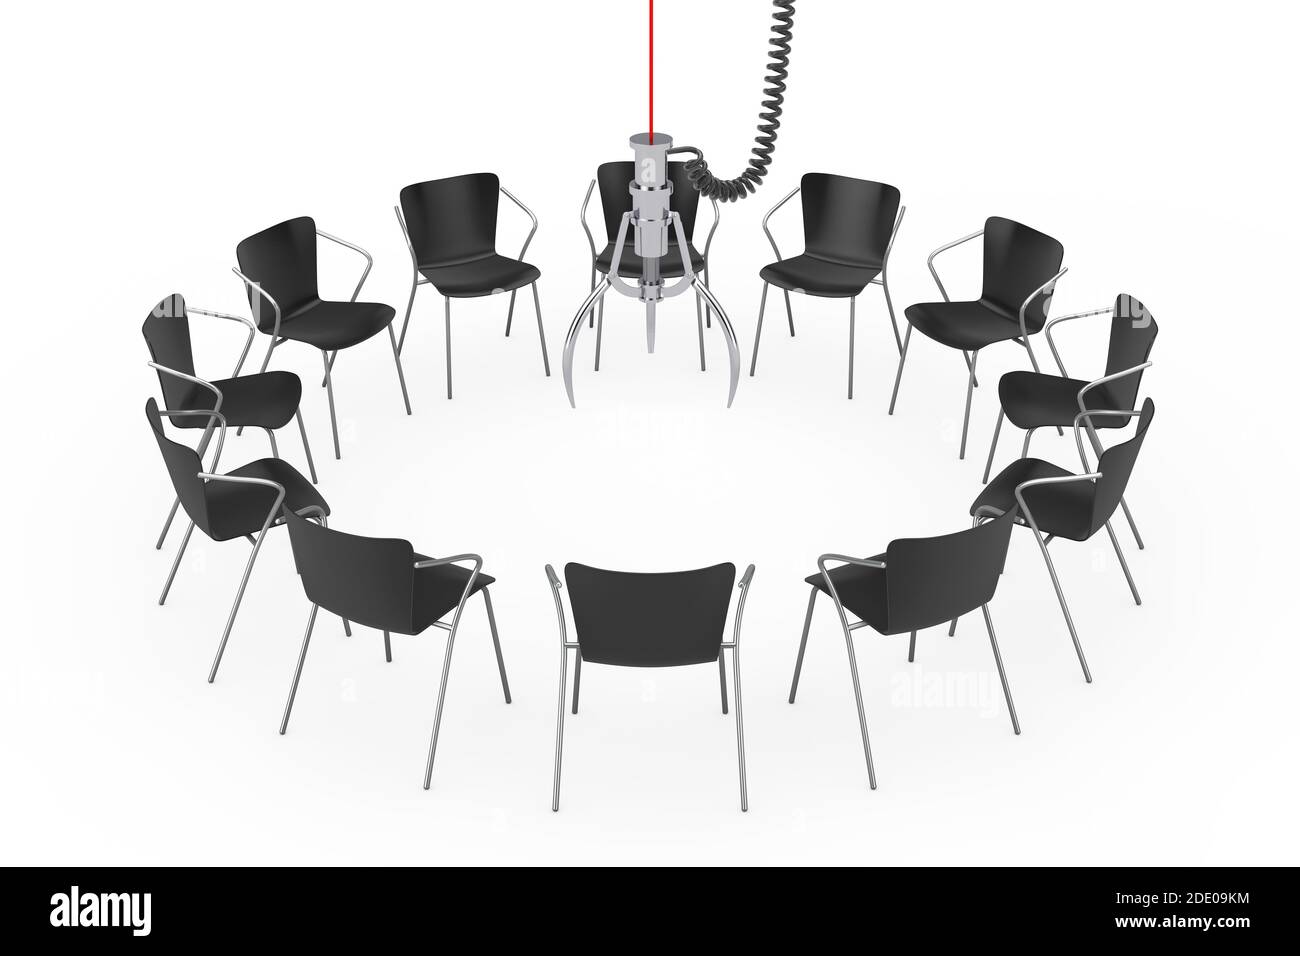 Black Office Chairs Around Chrome Robotic Claw on a white background. 3d Rendering Stock Photo